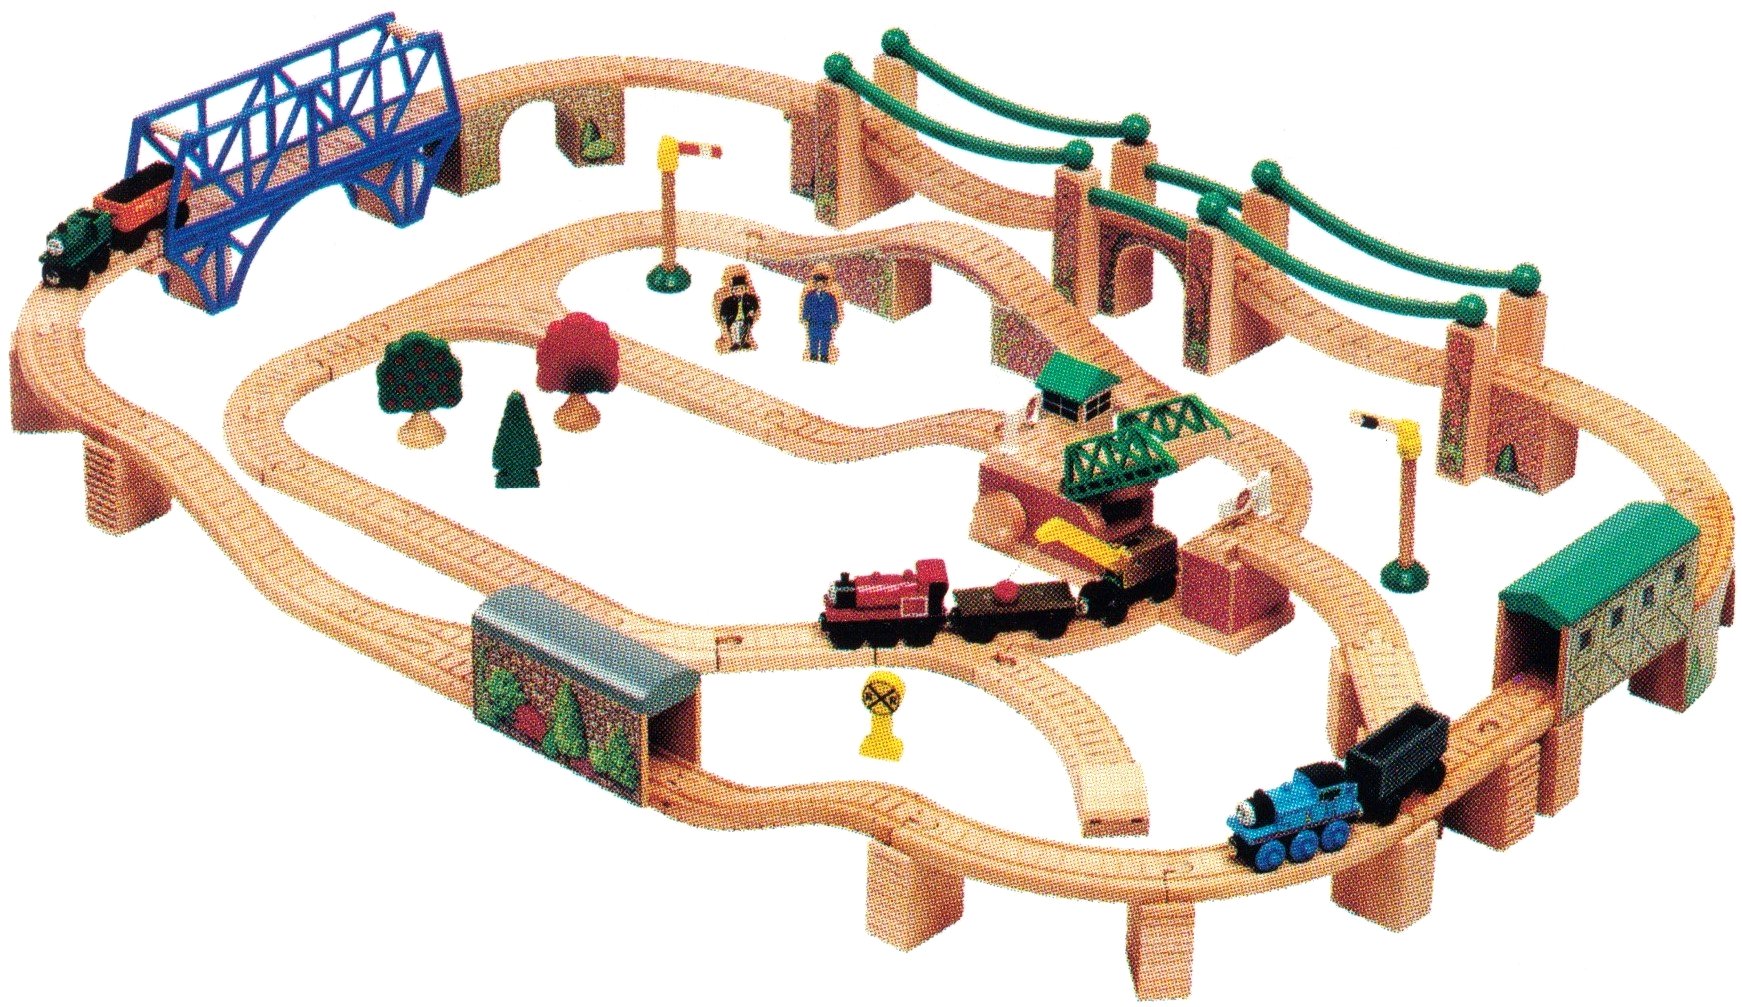 wooden train bridges and tunnels